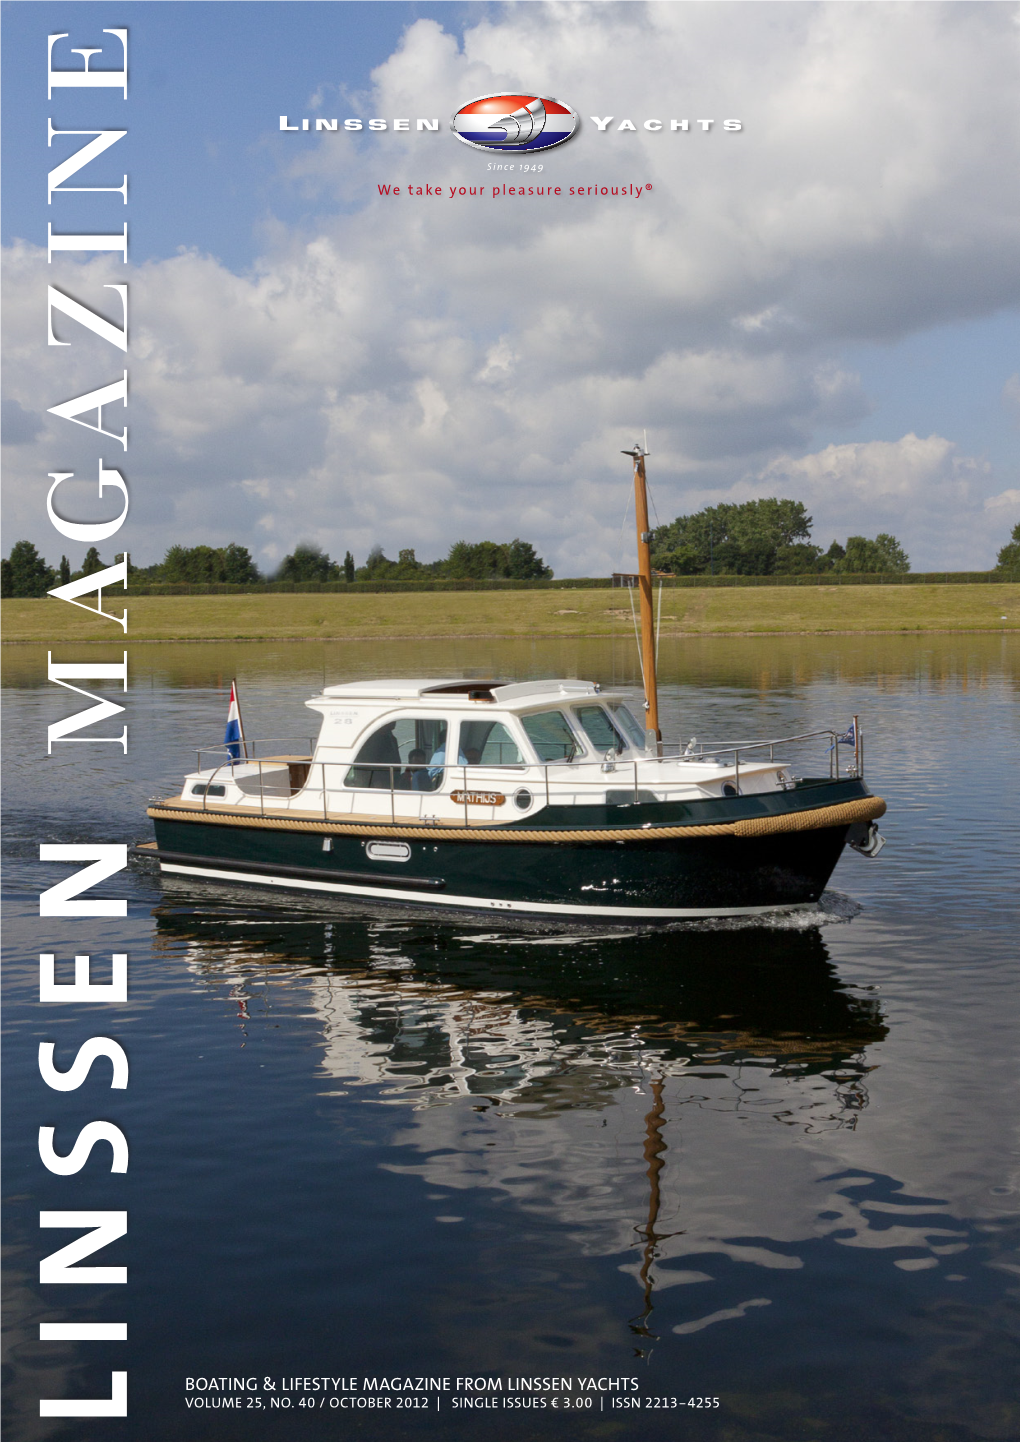 Boating & Lifestyle Magazine from Linssen